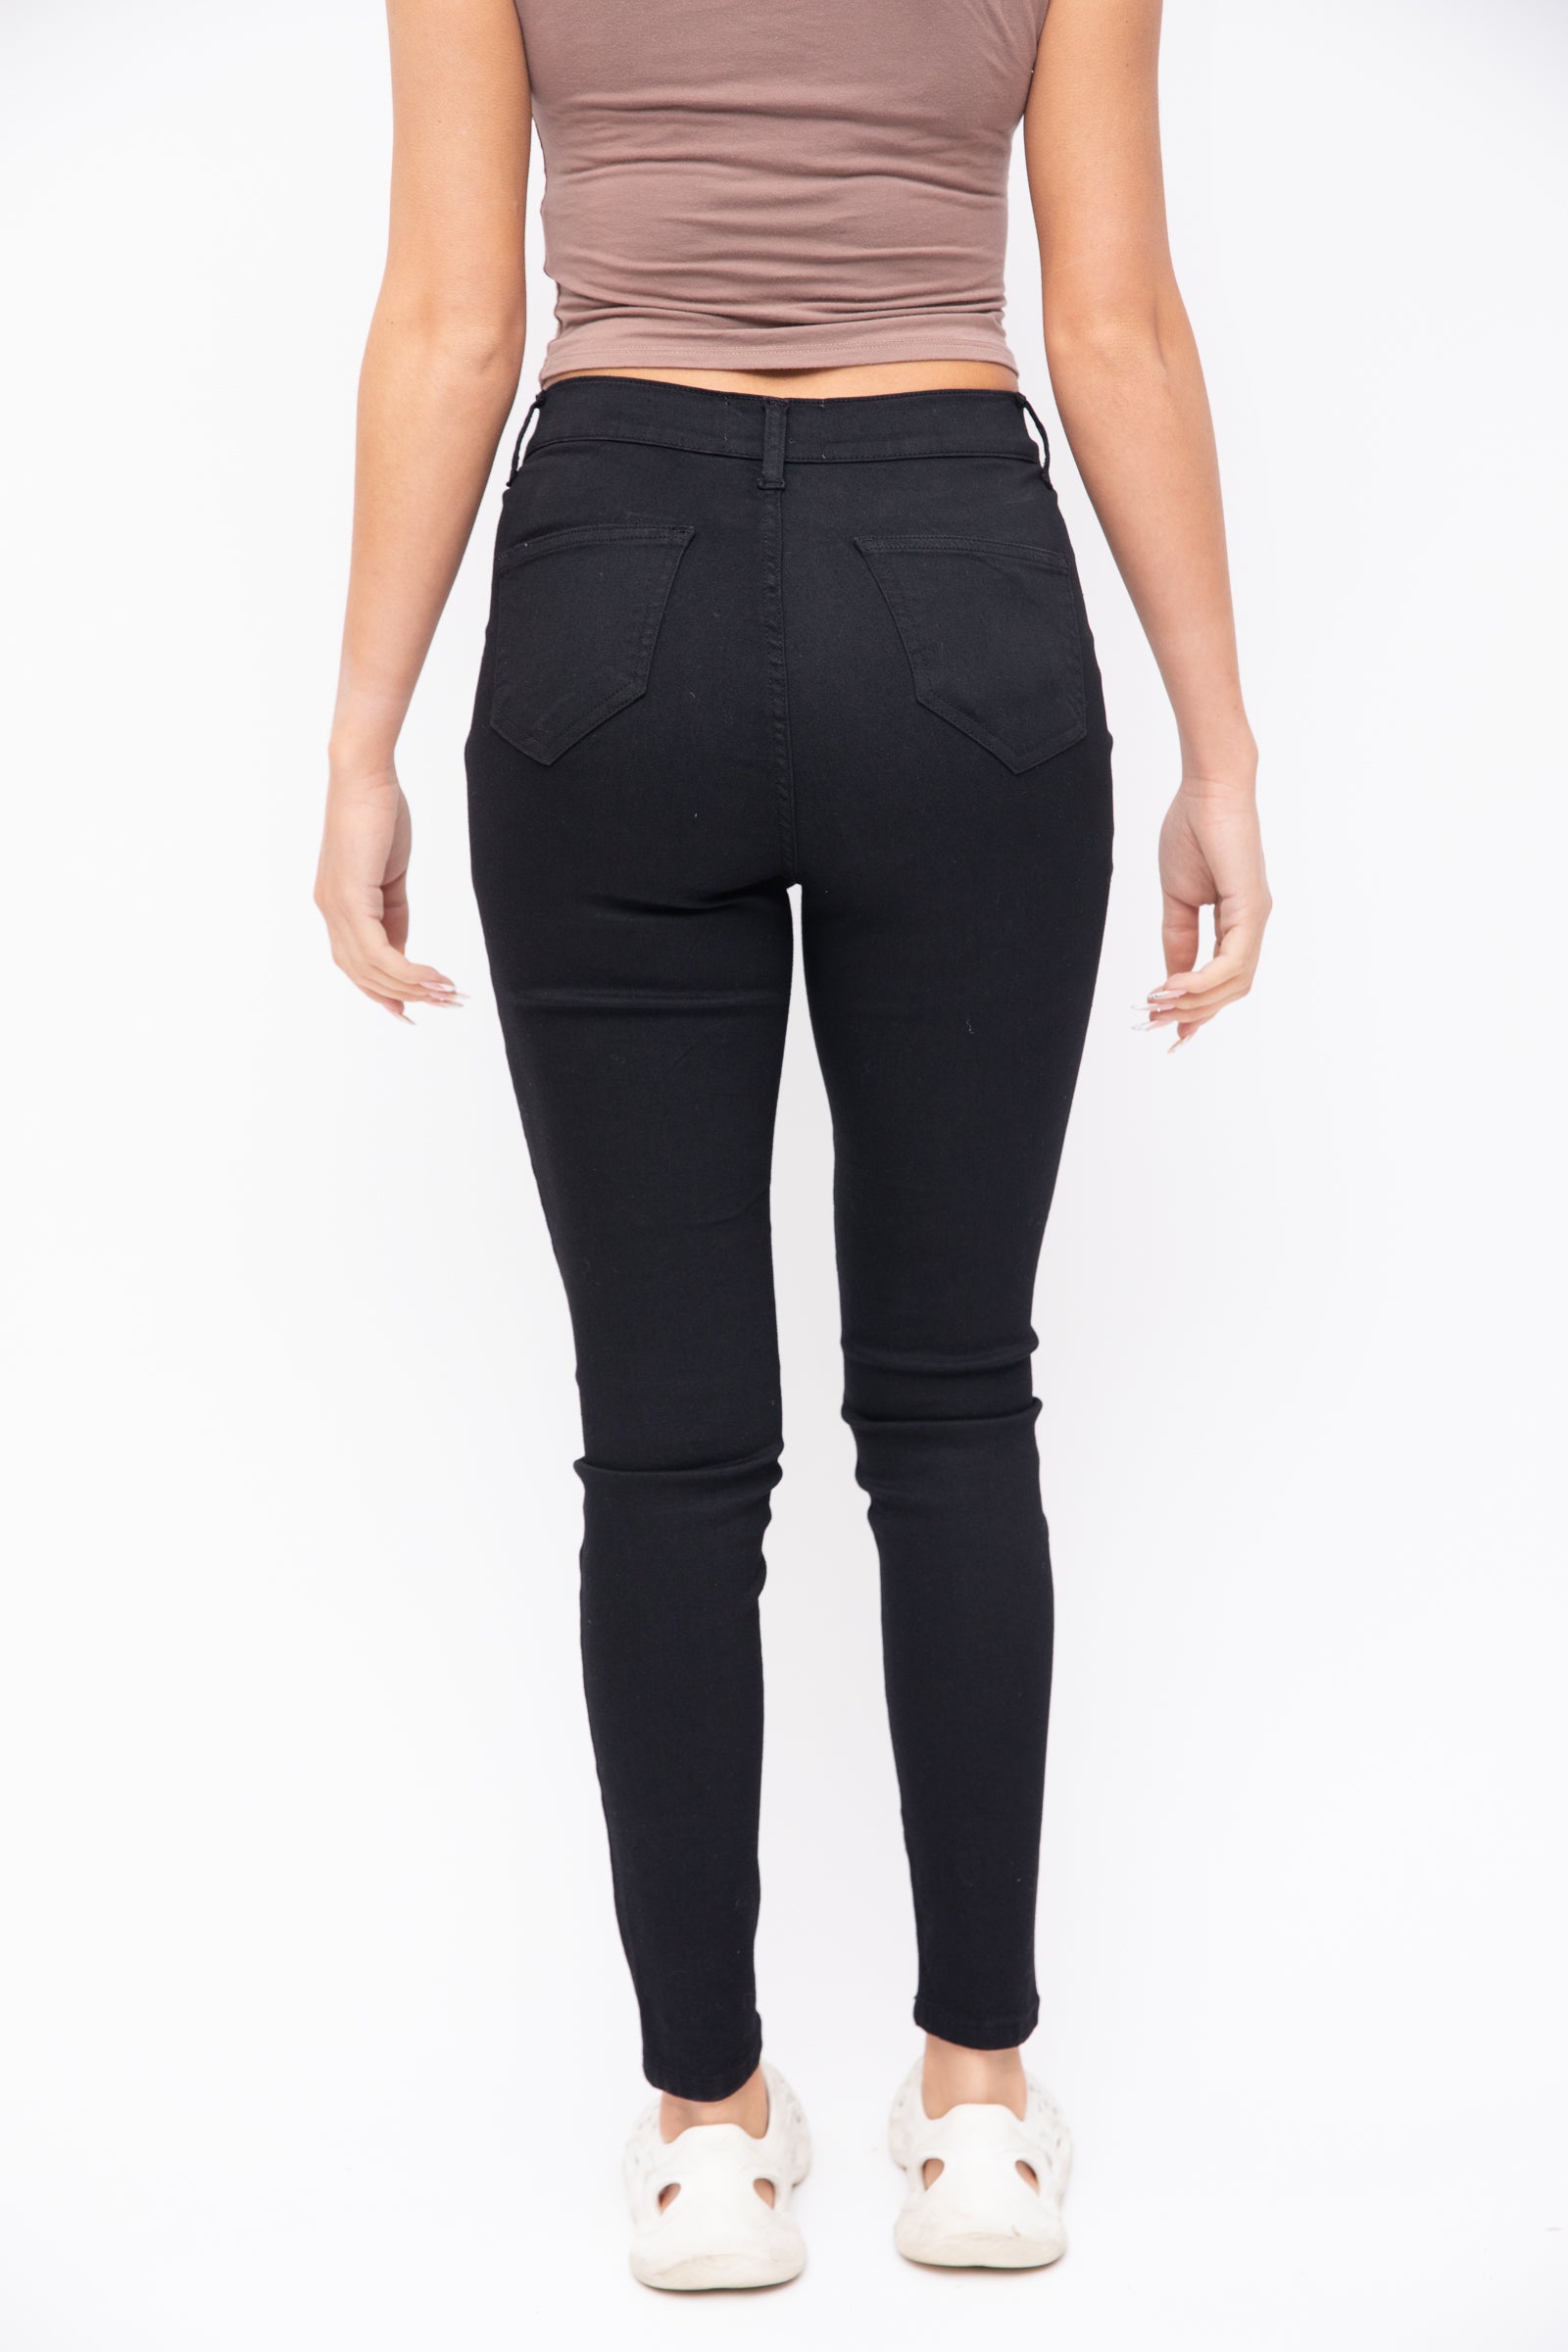 Don't Think Twice DTT Chloe high waisted disco stretch skinny jeans in  black 